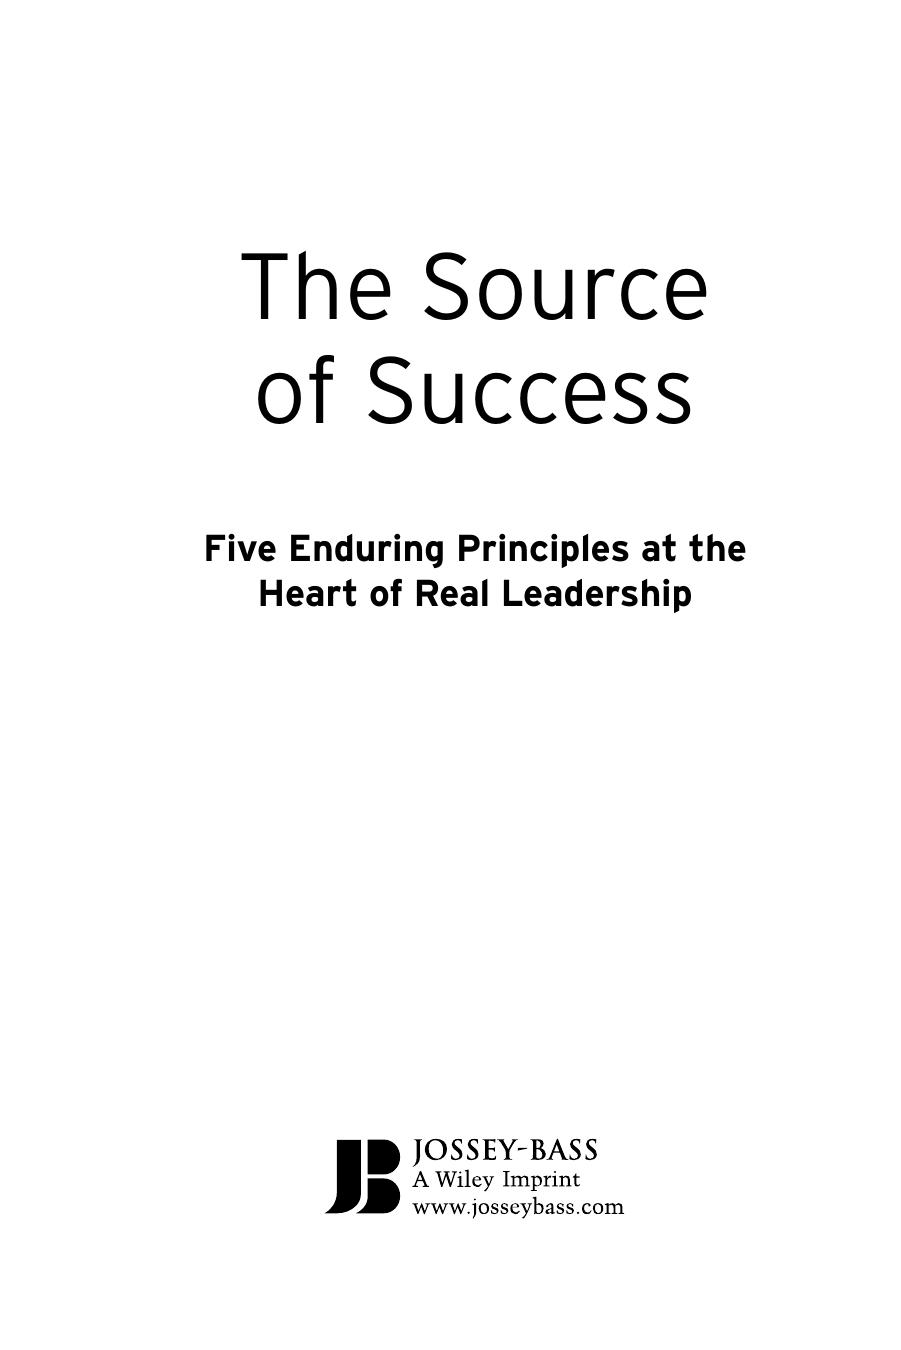 Peter_Georgescu,_Ram_Charan,_David_Dorsey_The_Source_of_Success_Five_Enduring_Principles_at_the_Heart_of_Real_Leadership___2005